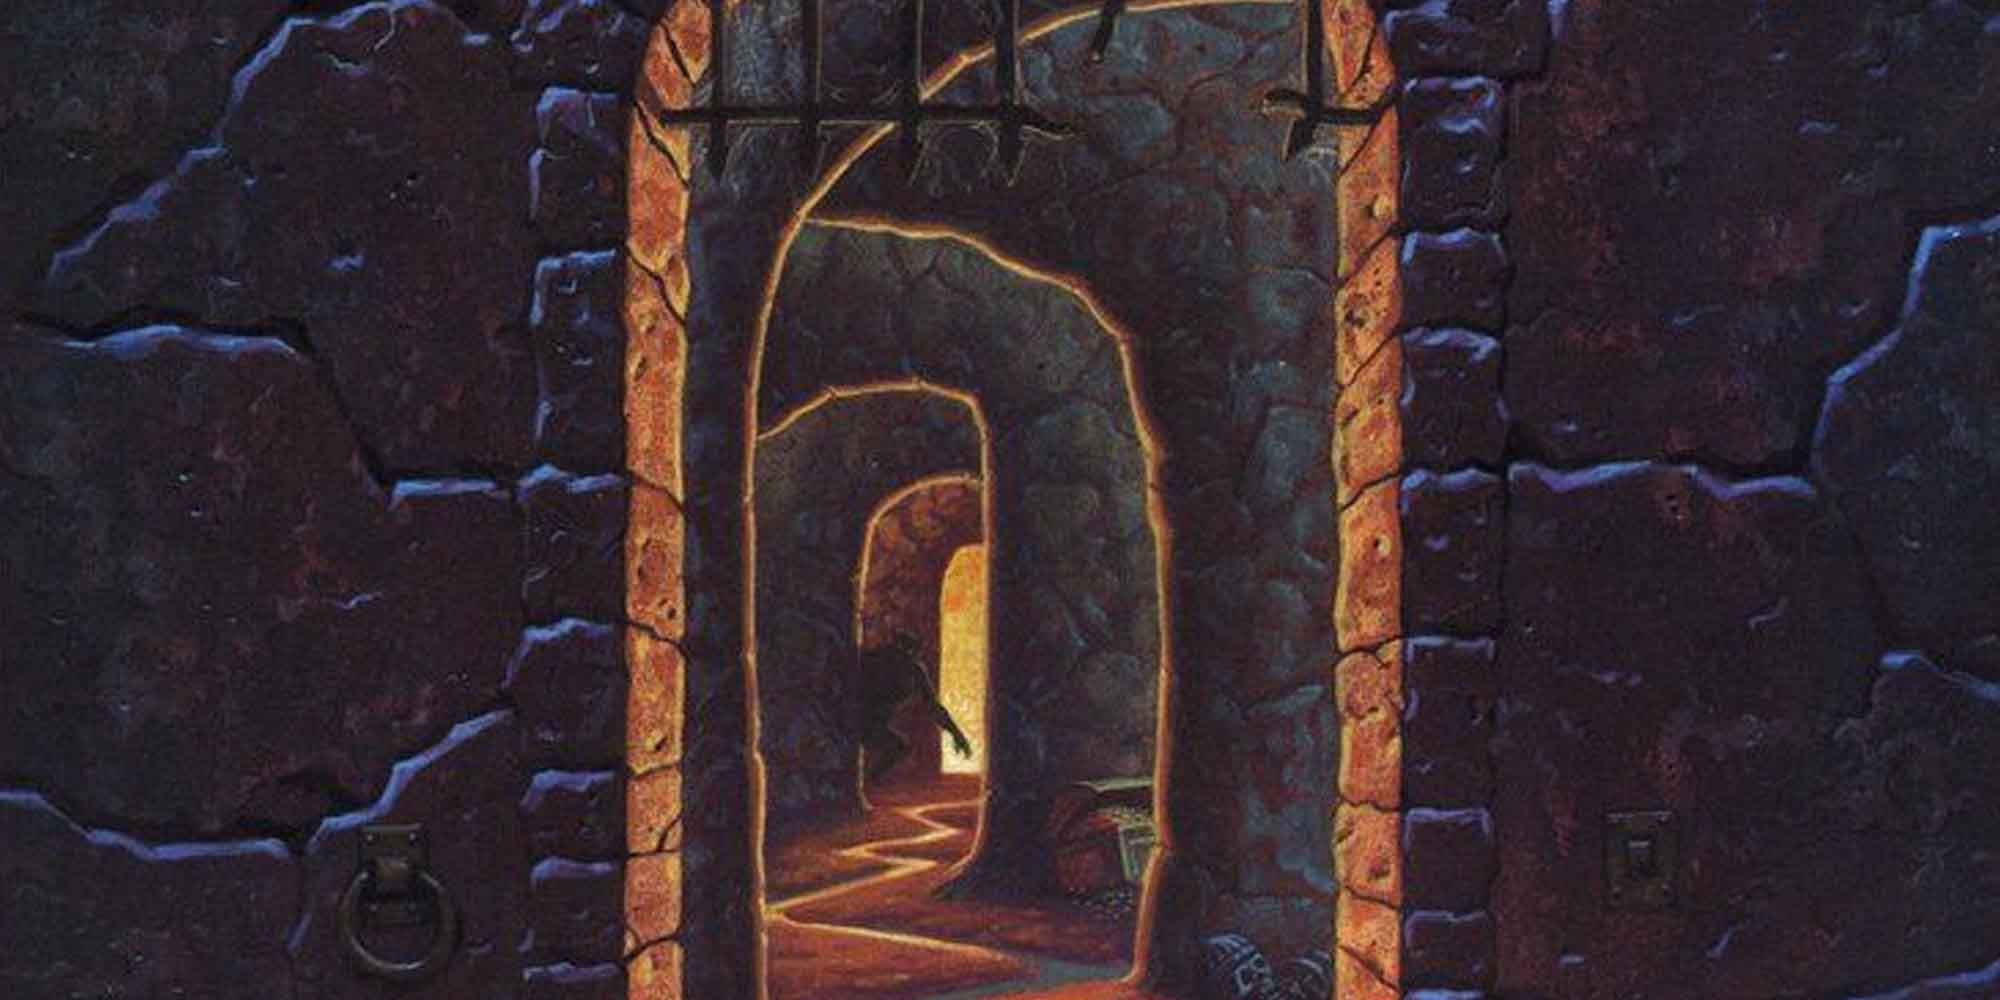 The cover of the Ruins of Undermountain D&D Campaign